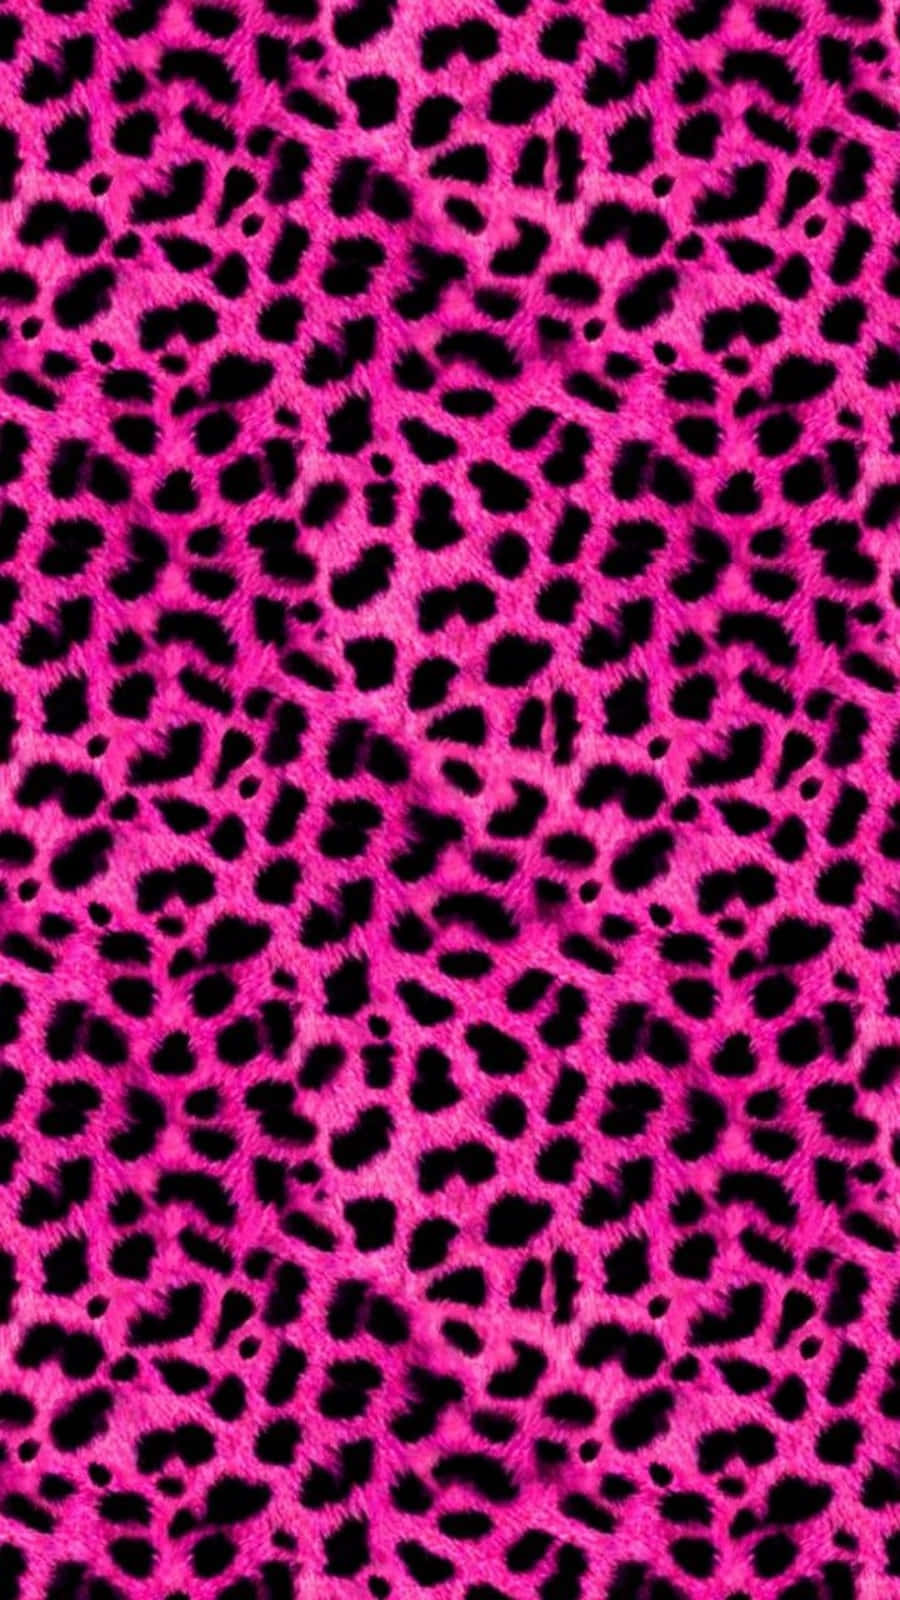 Leopard Spots In Pink Girly Tumblr Background